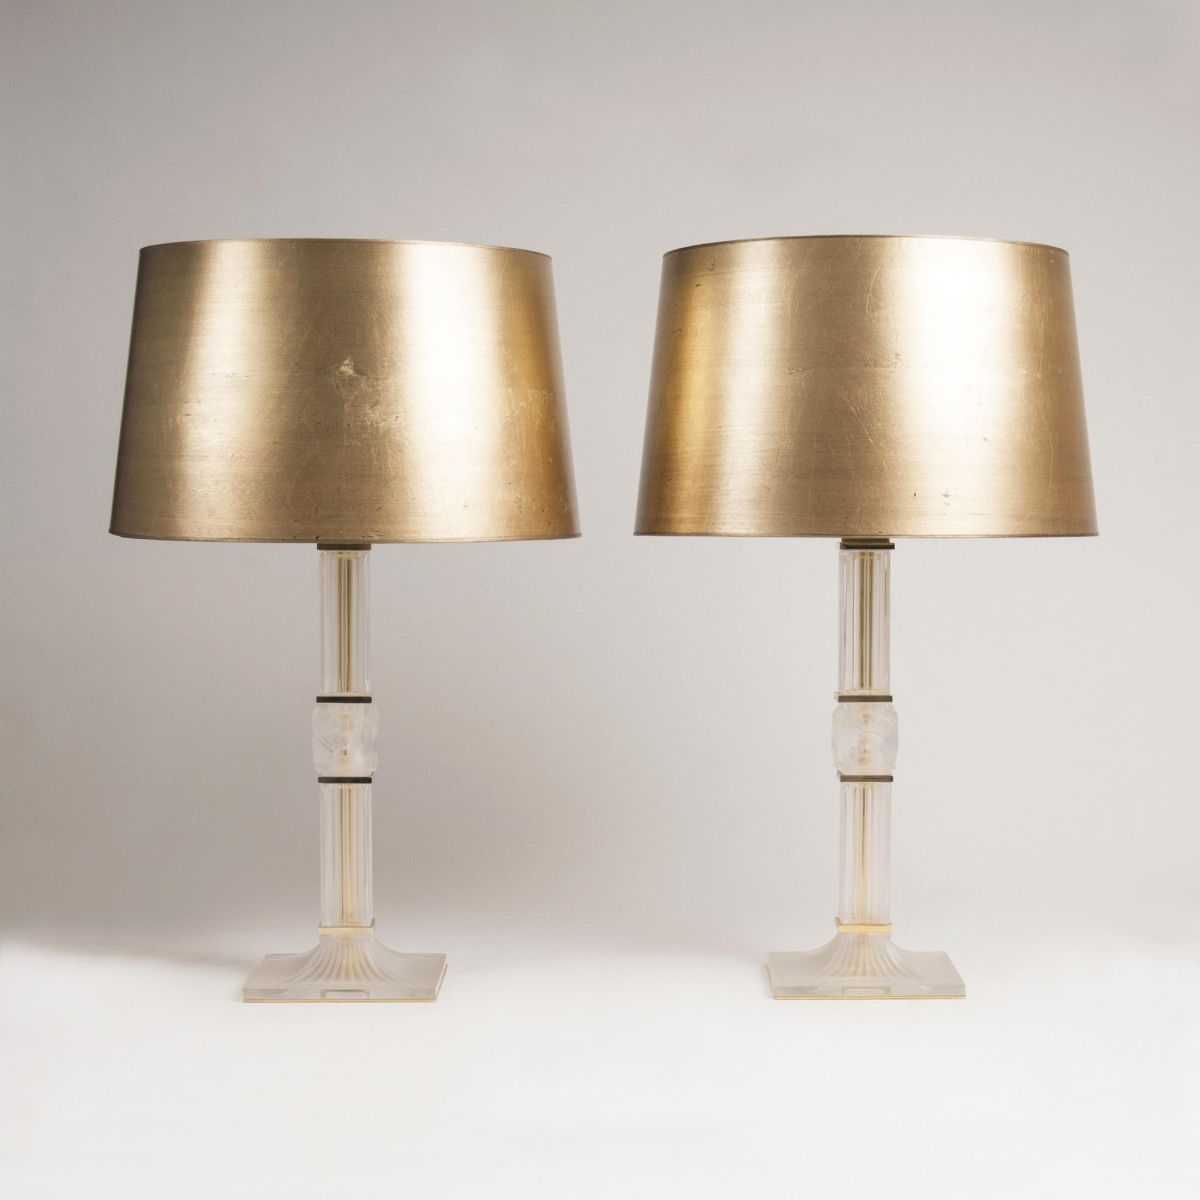 A Pair of Decorative Table Lamps 'Joséphine' with Swan Motifs